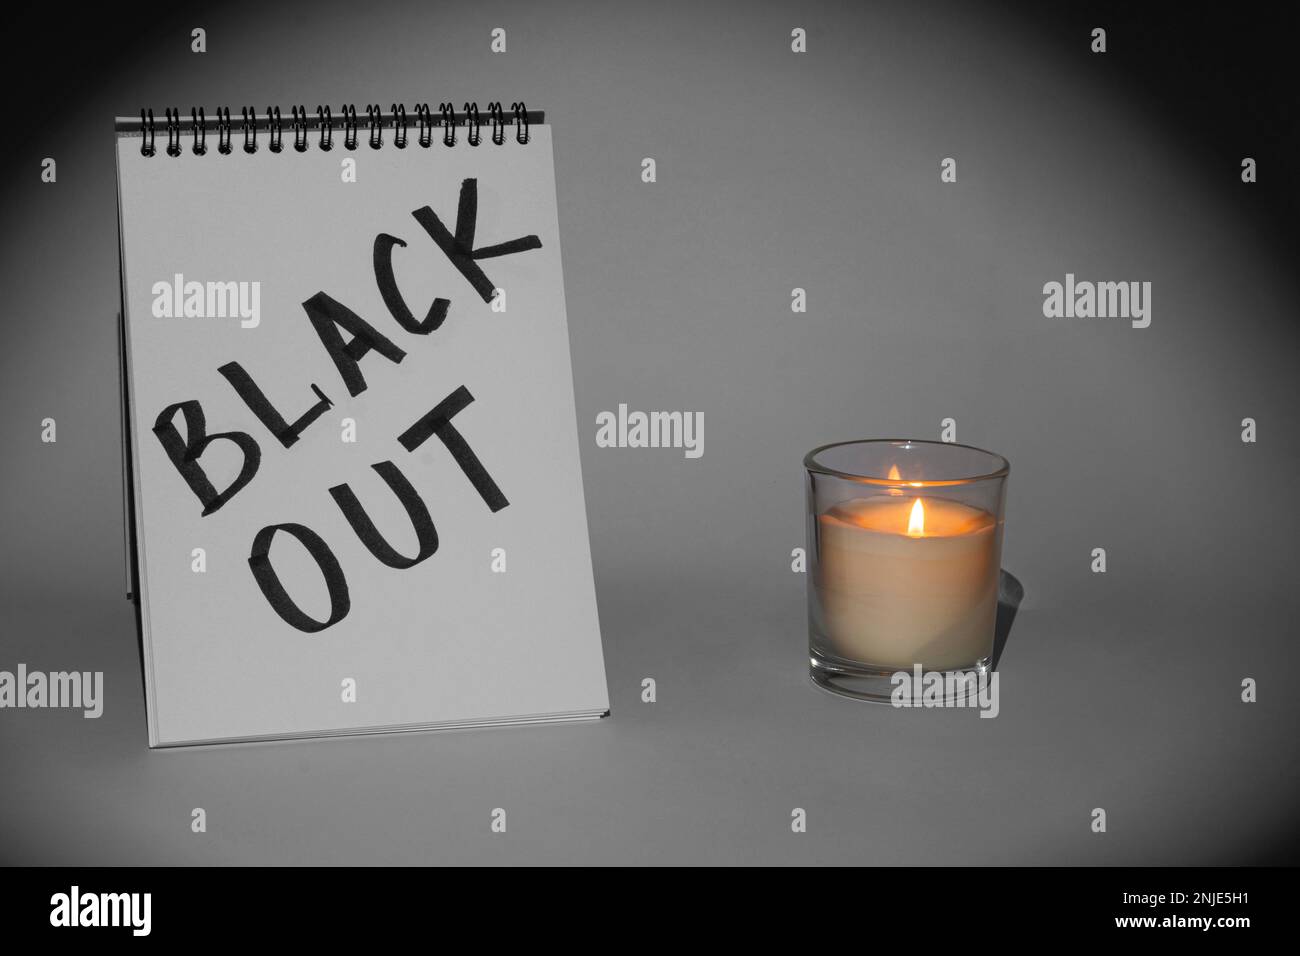 Notepad with the inscription 'Blackout' and a burning candle in a glass on a gray background, illuminated by a flashlight. Monochrome picture Stock Photo